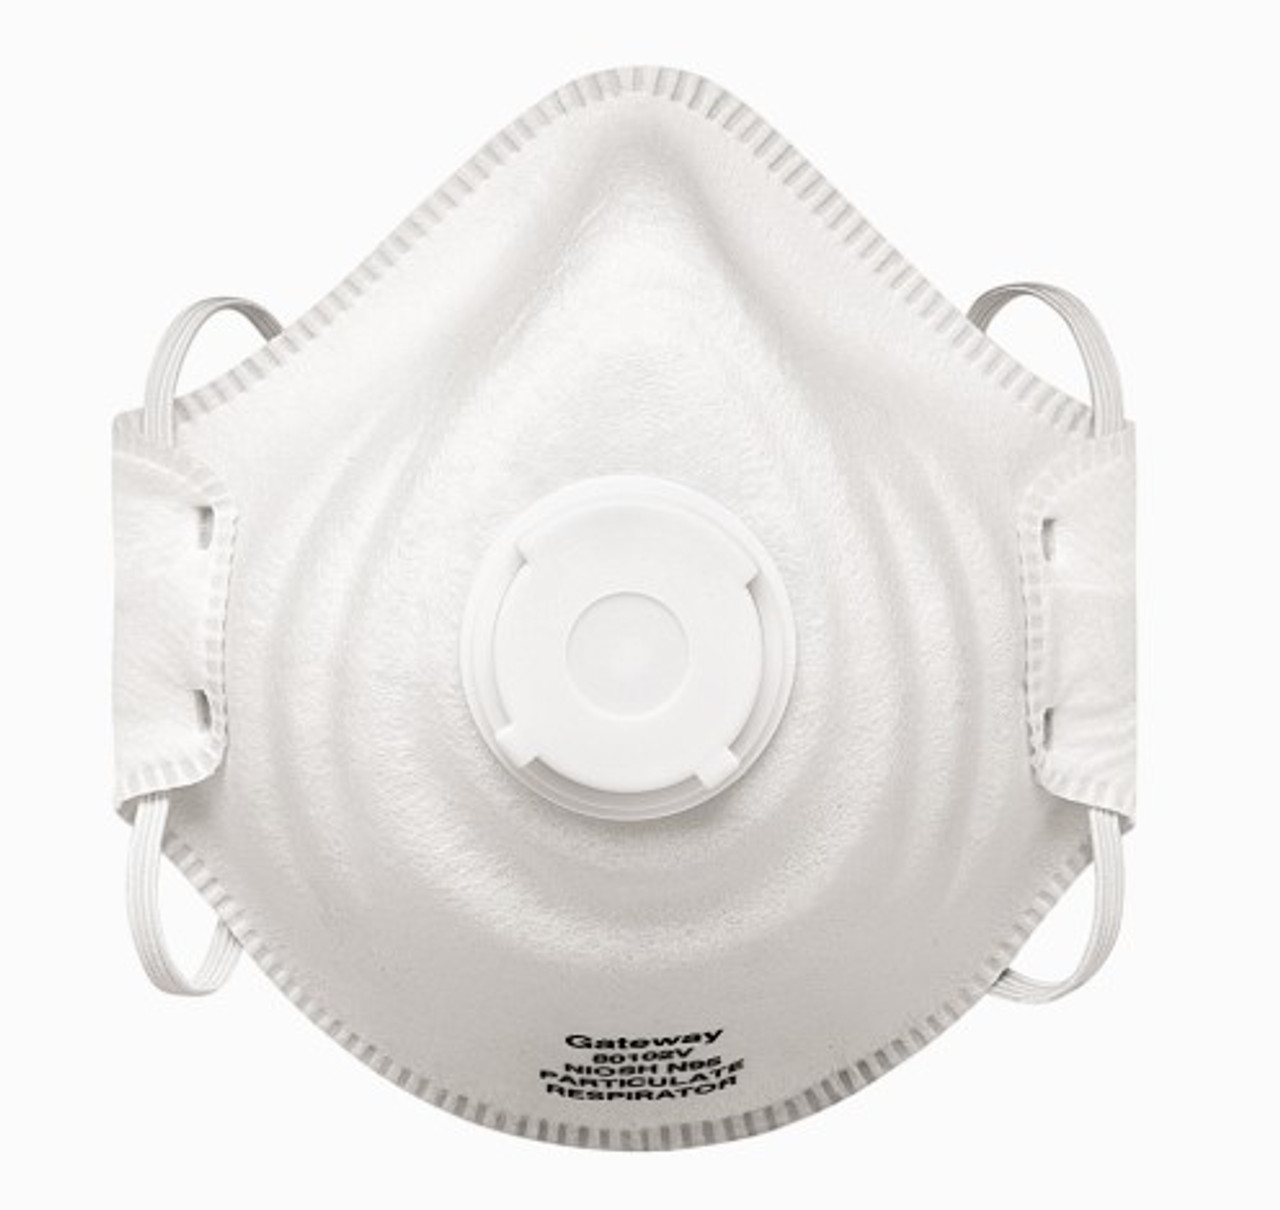 PEAKFIT RESPIRATOR WITH VENT, 10CT PER BOX